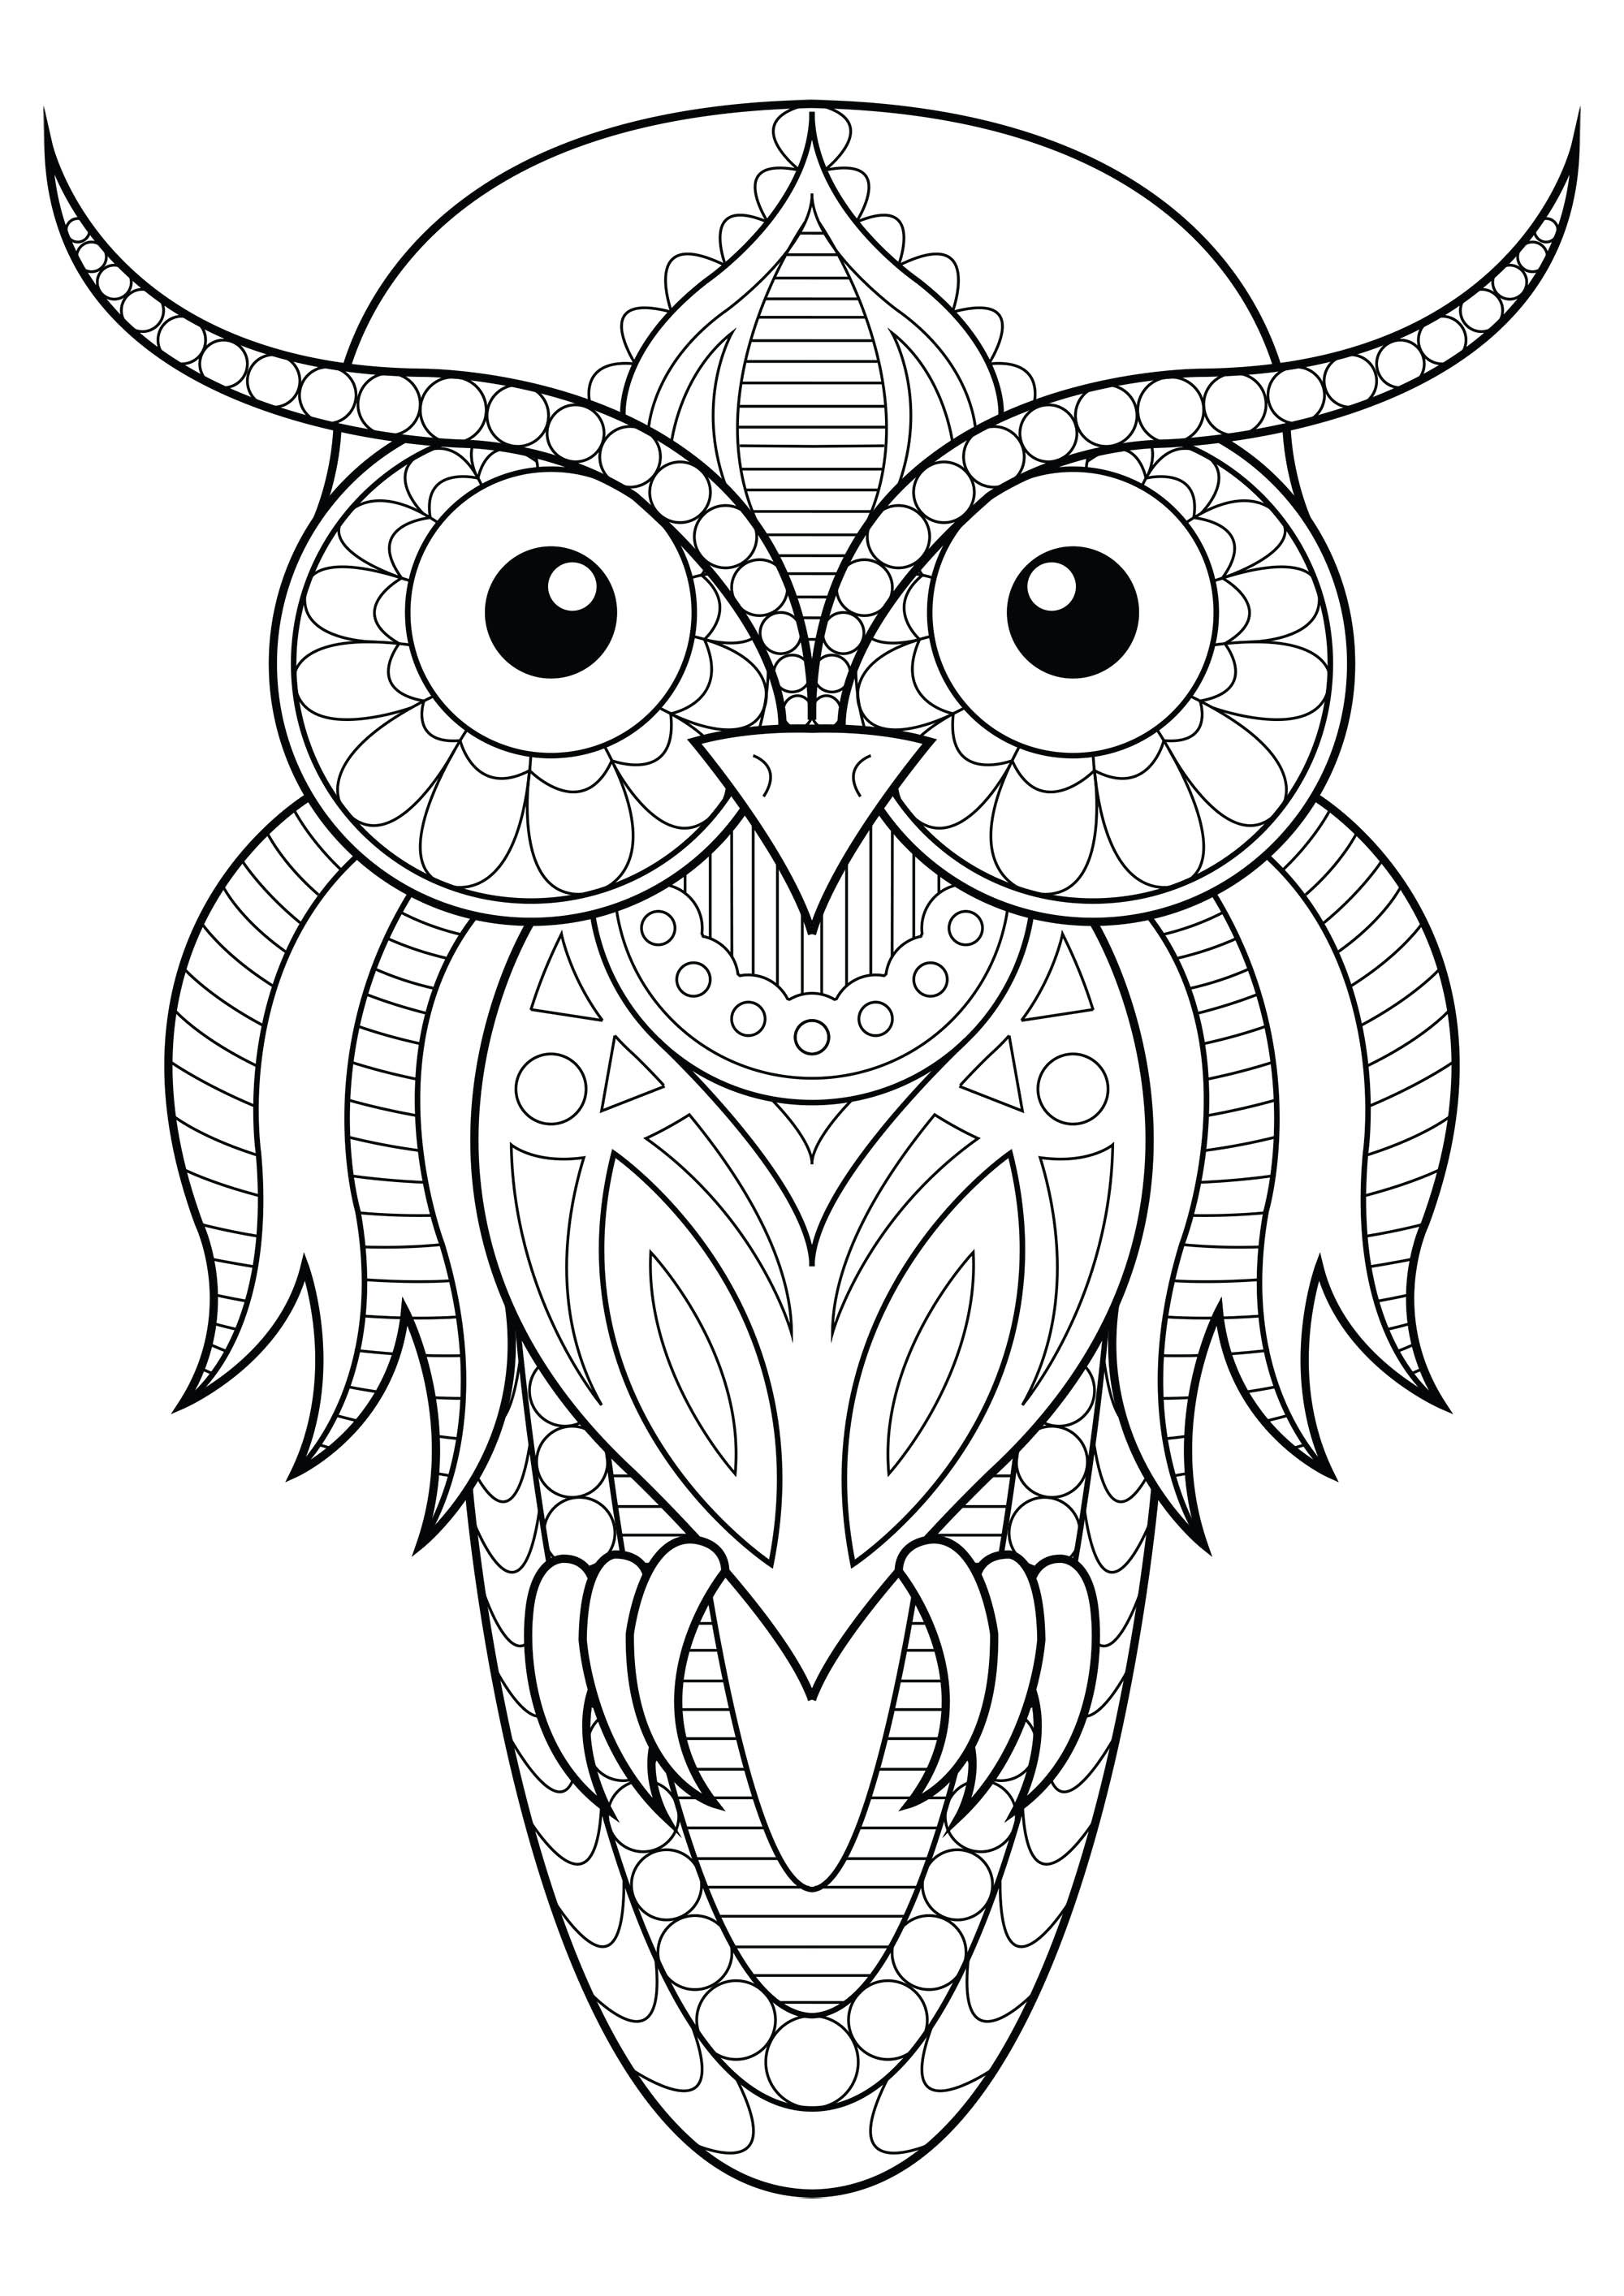 Color this simple Owl with beautiful patterns, Artist : Lucie